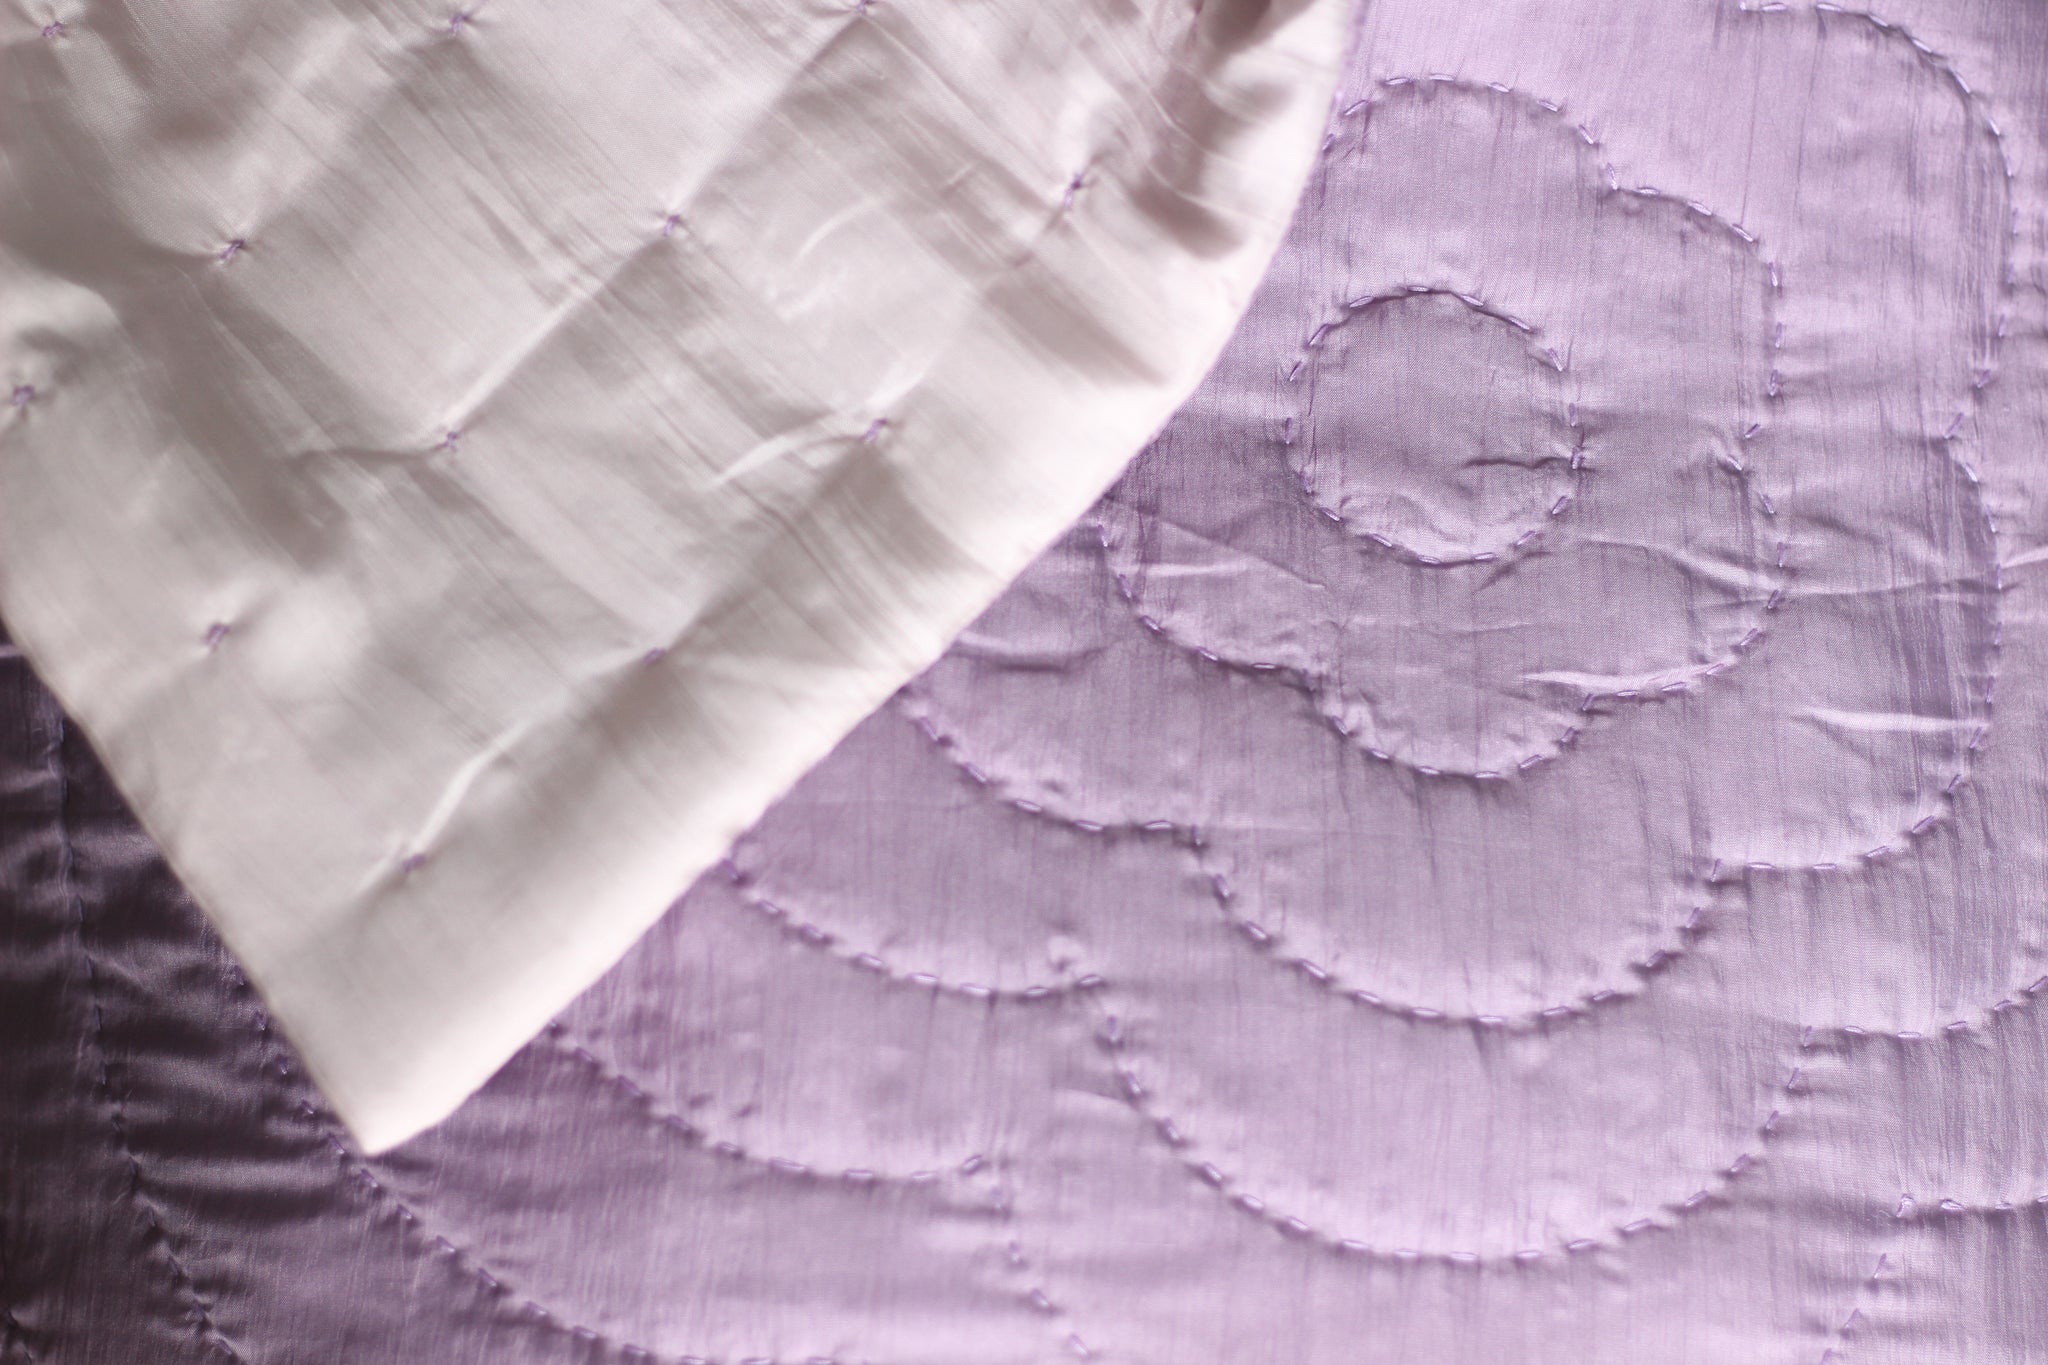 Mulberry Silk Bedding Set - Quilt and Shams - Blossom Hand Stitching